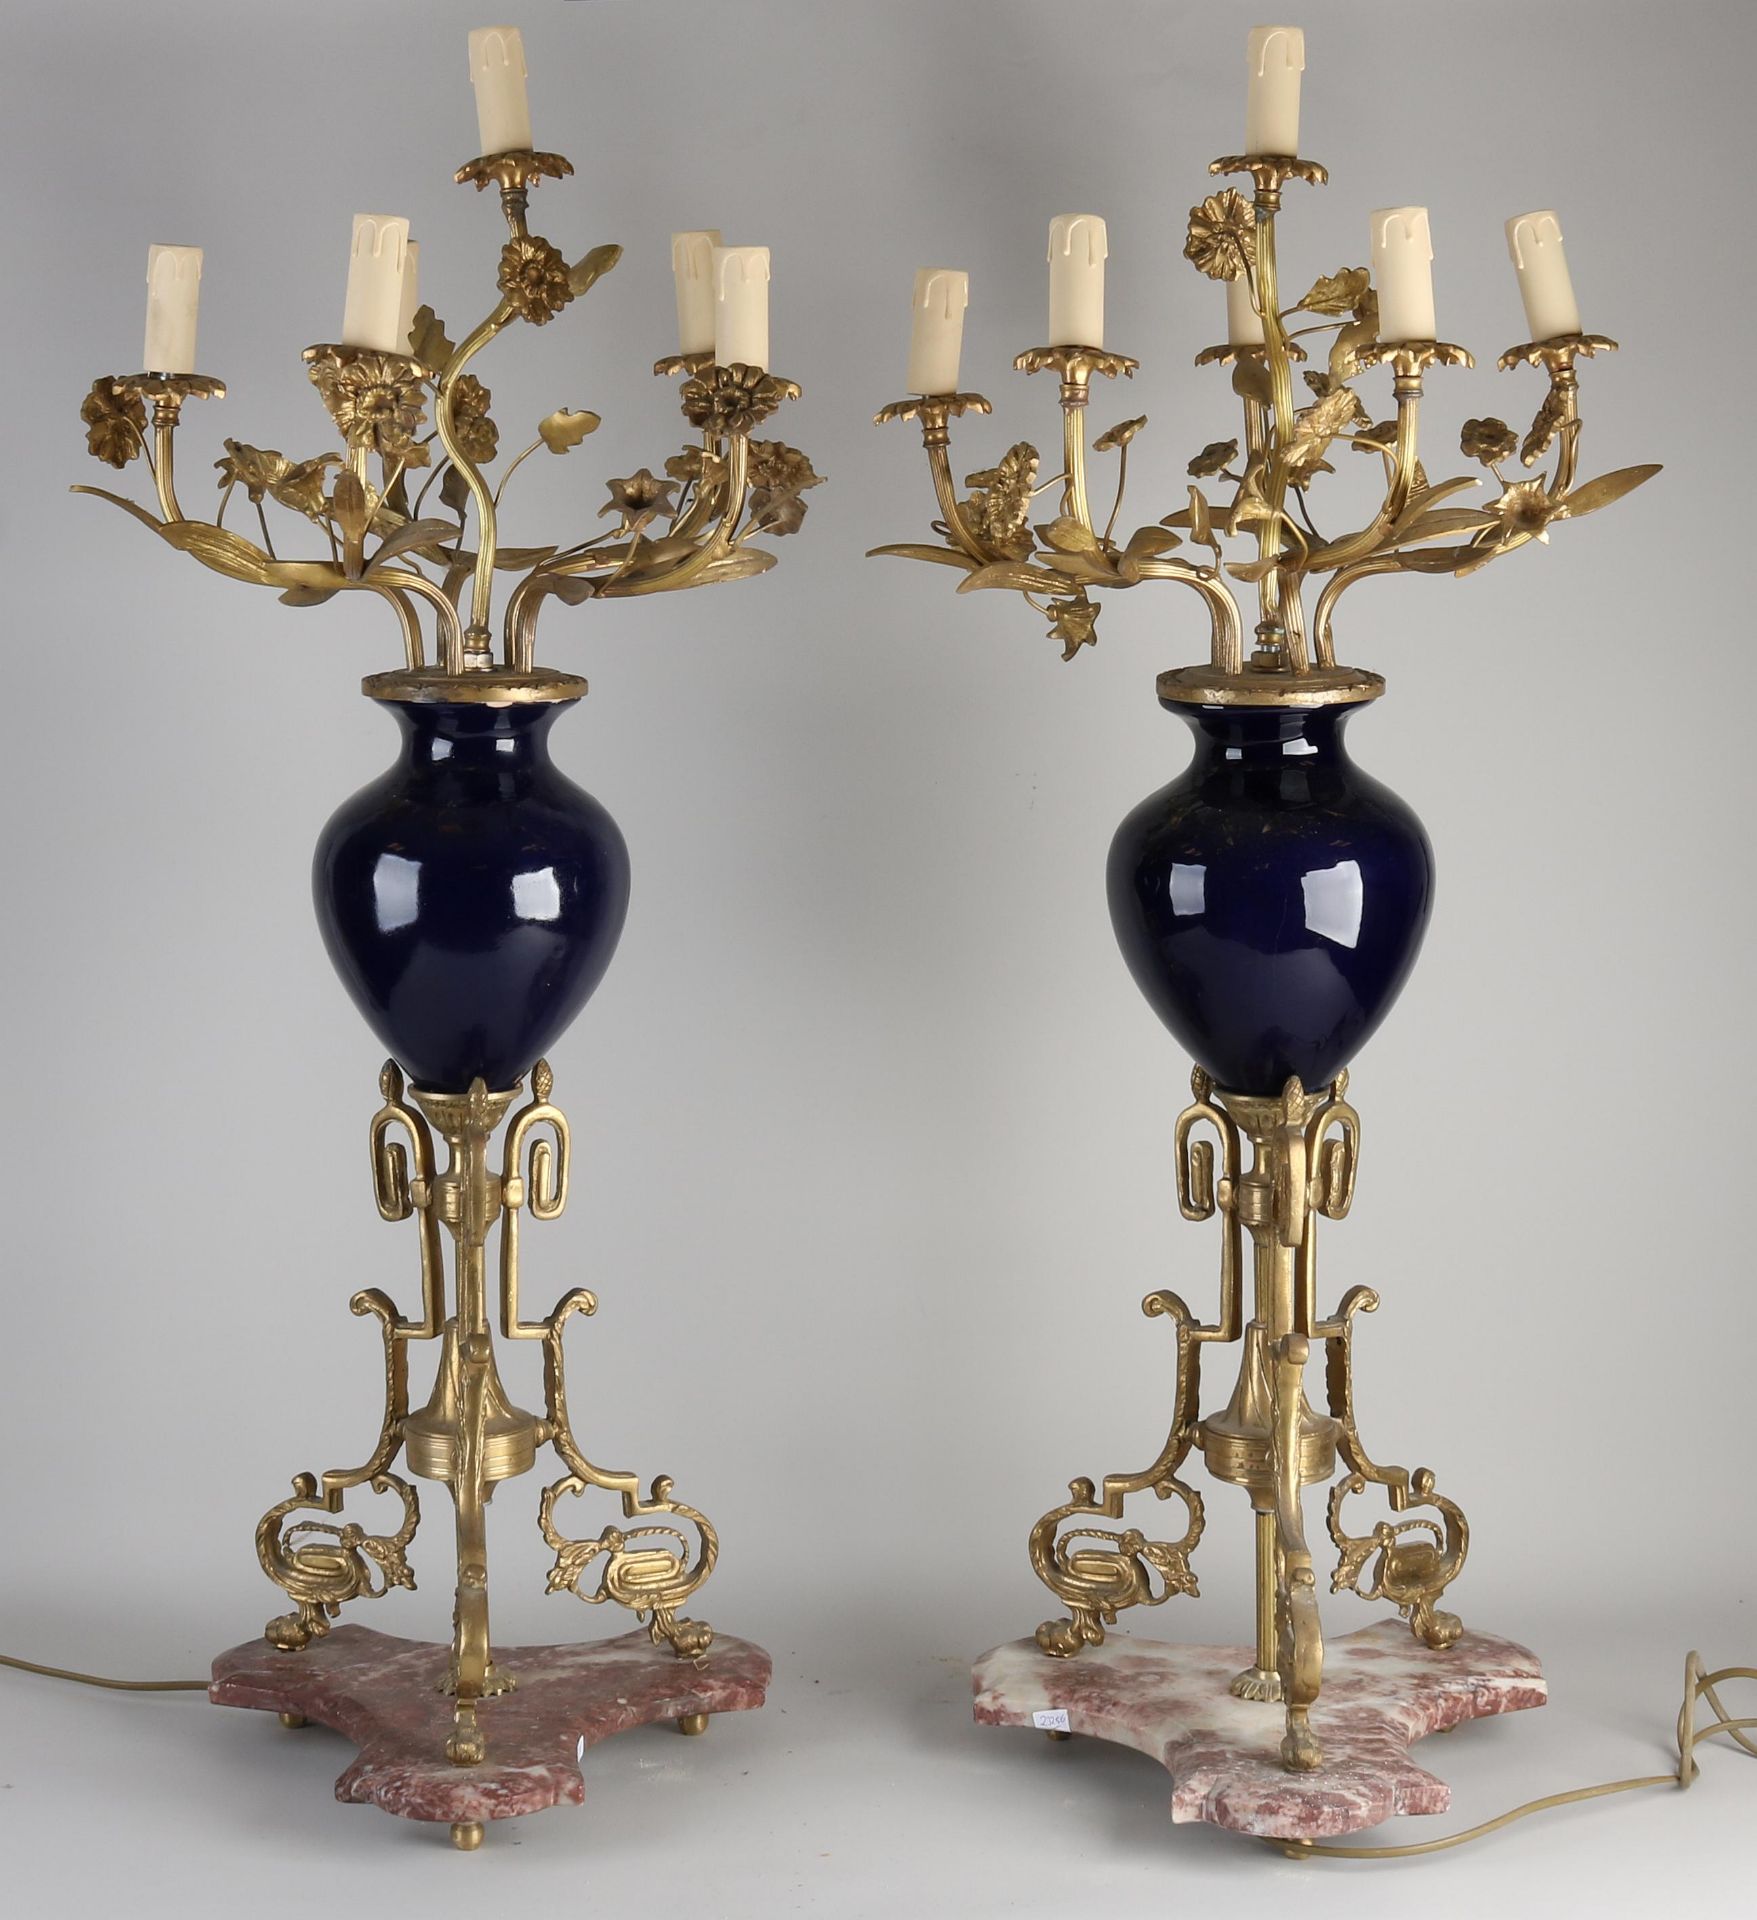 Two antique French candlesticks, H 96 cm.